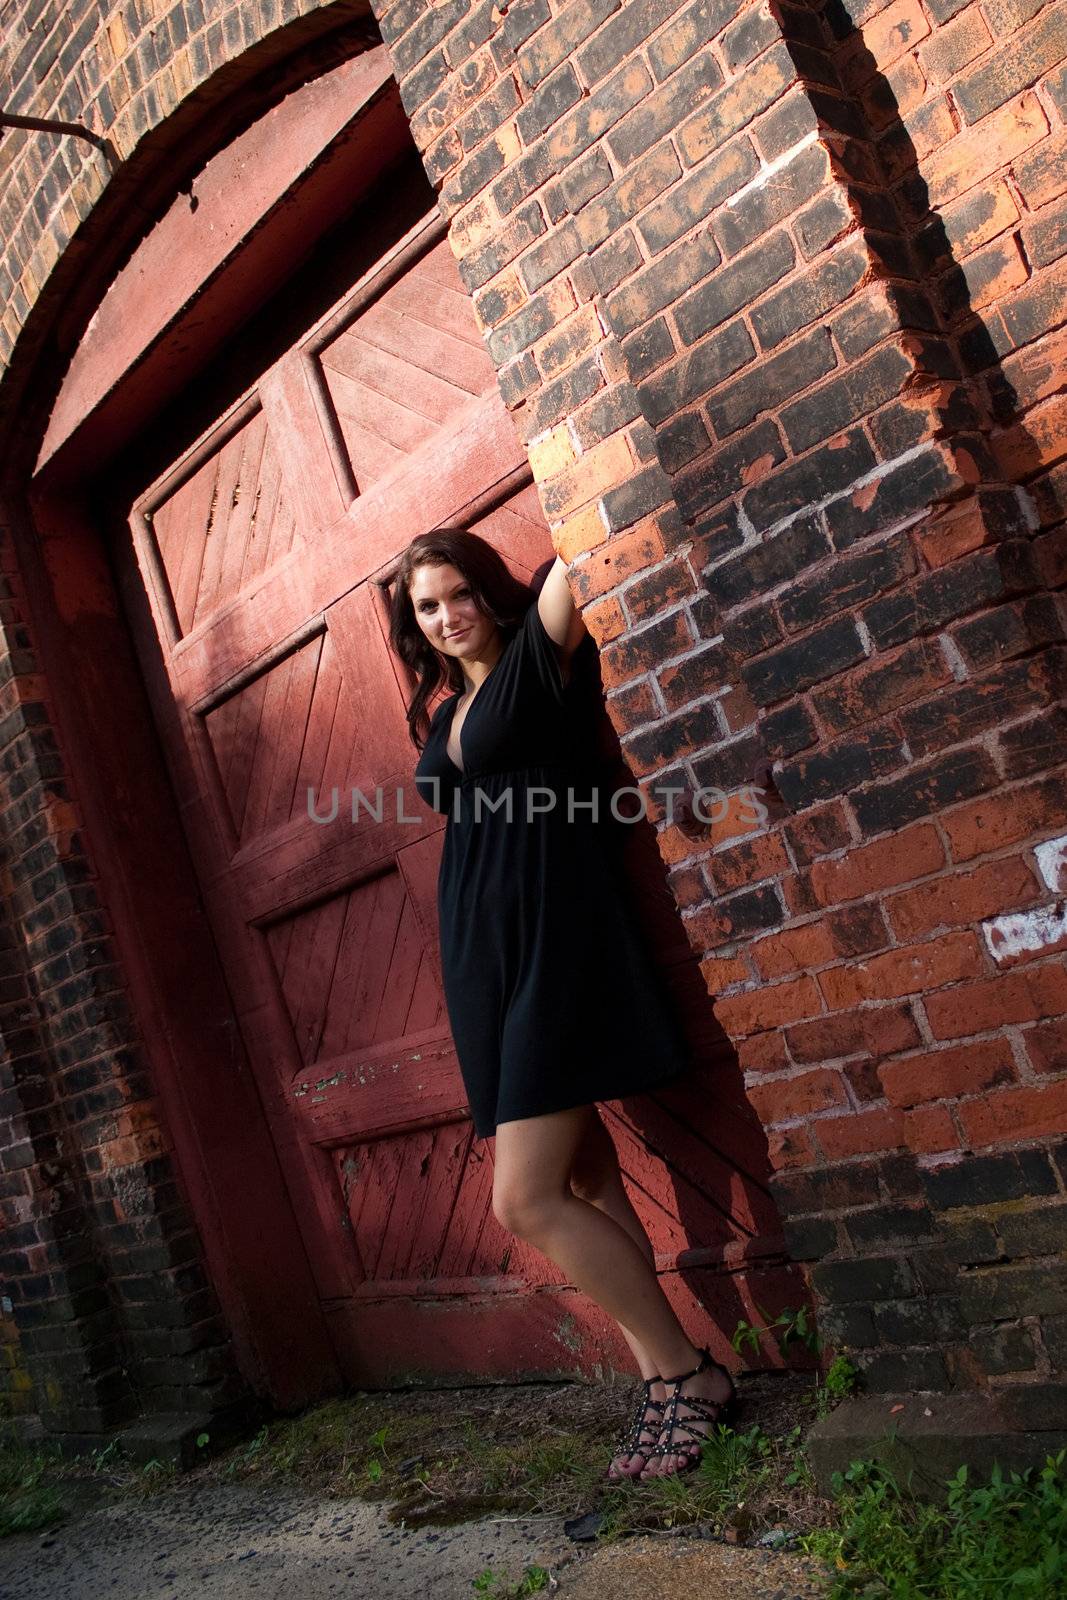 A pretty young woman in a black dress posing in an old doorway.